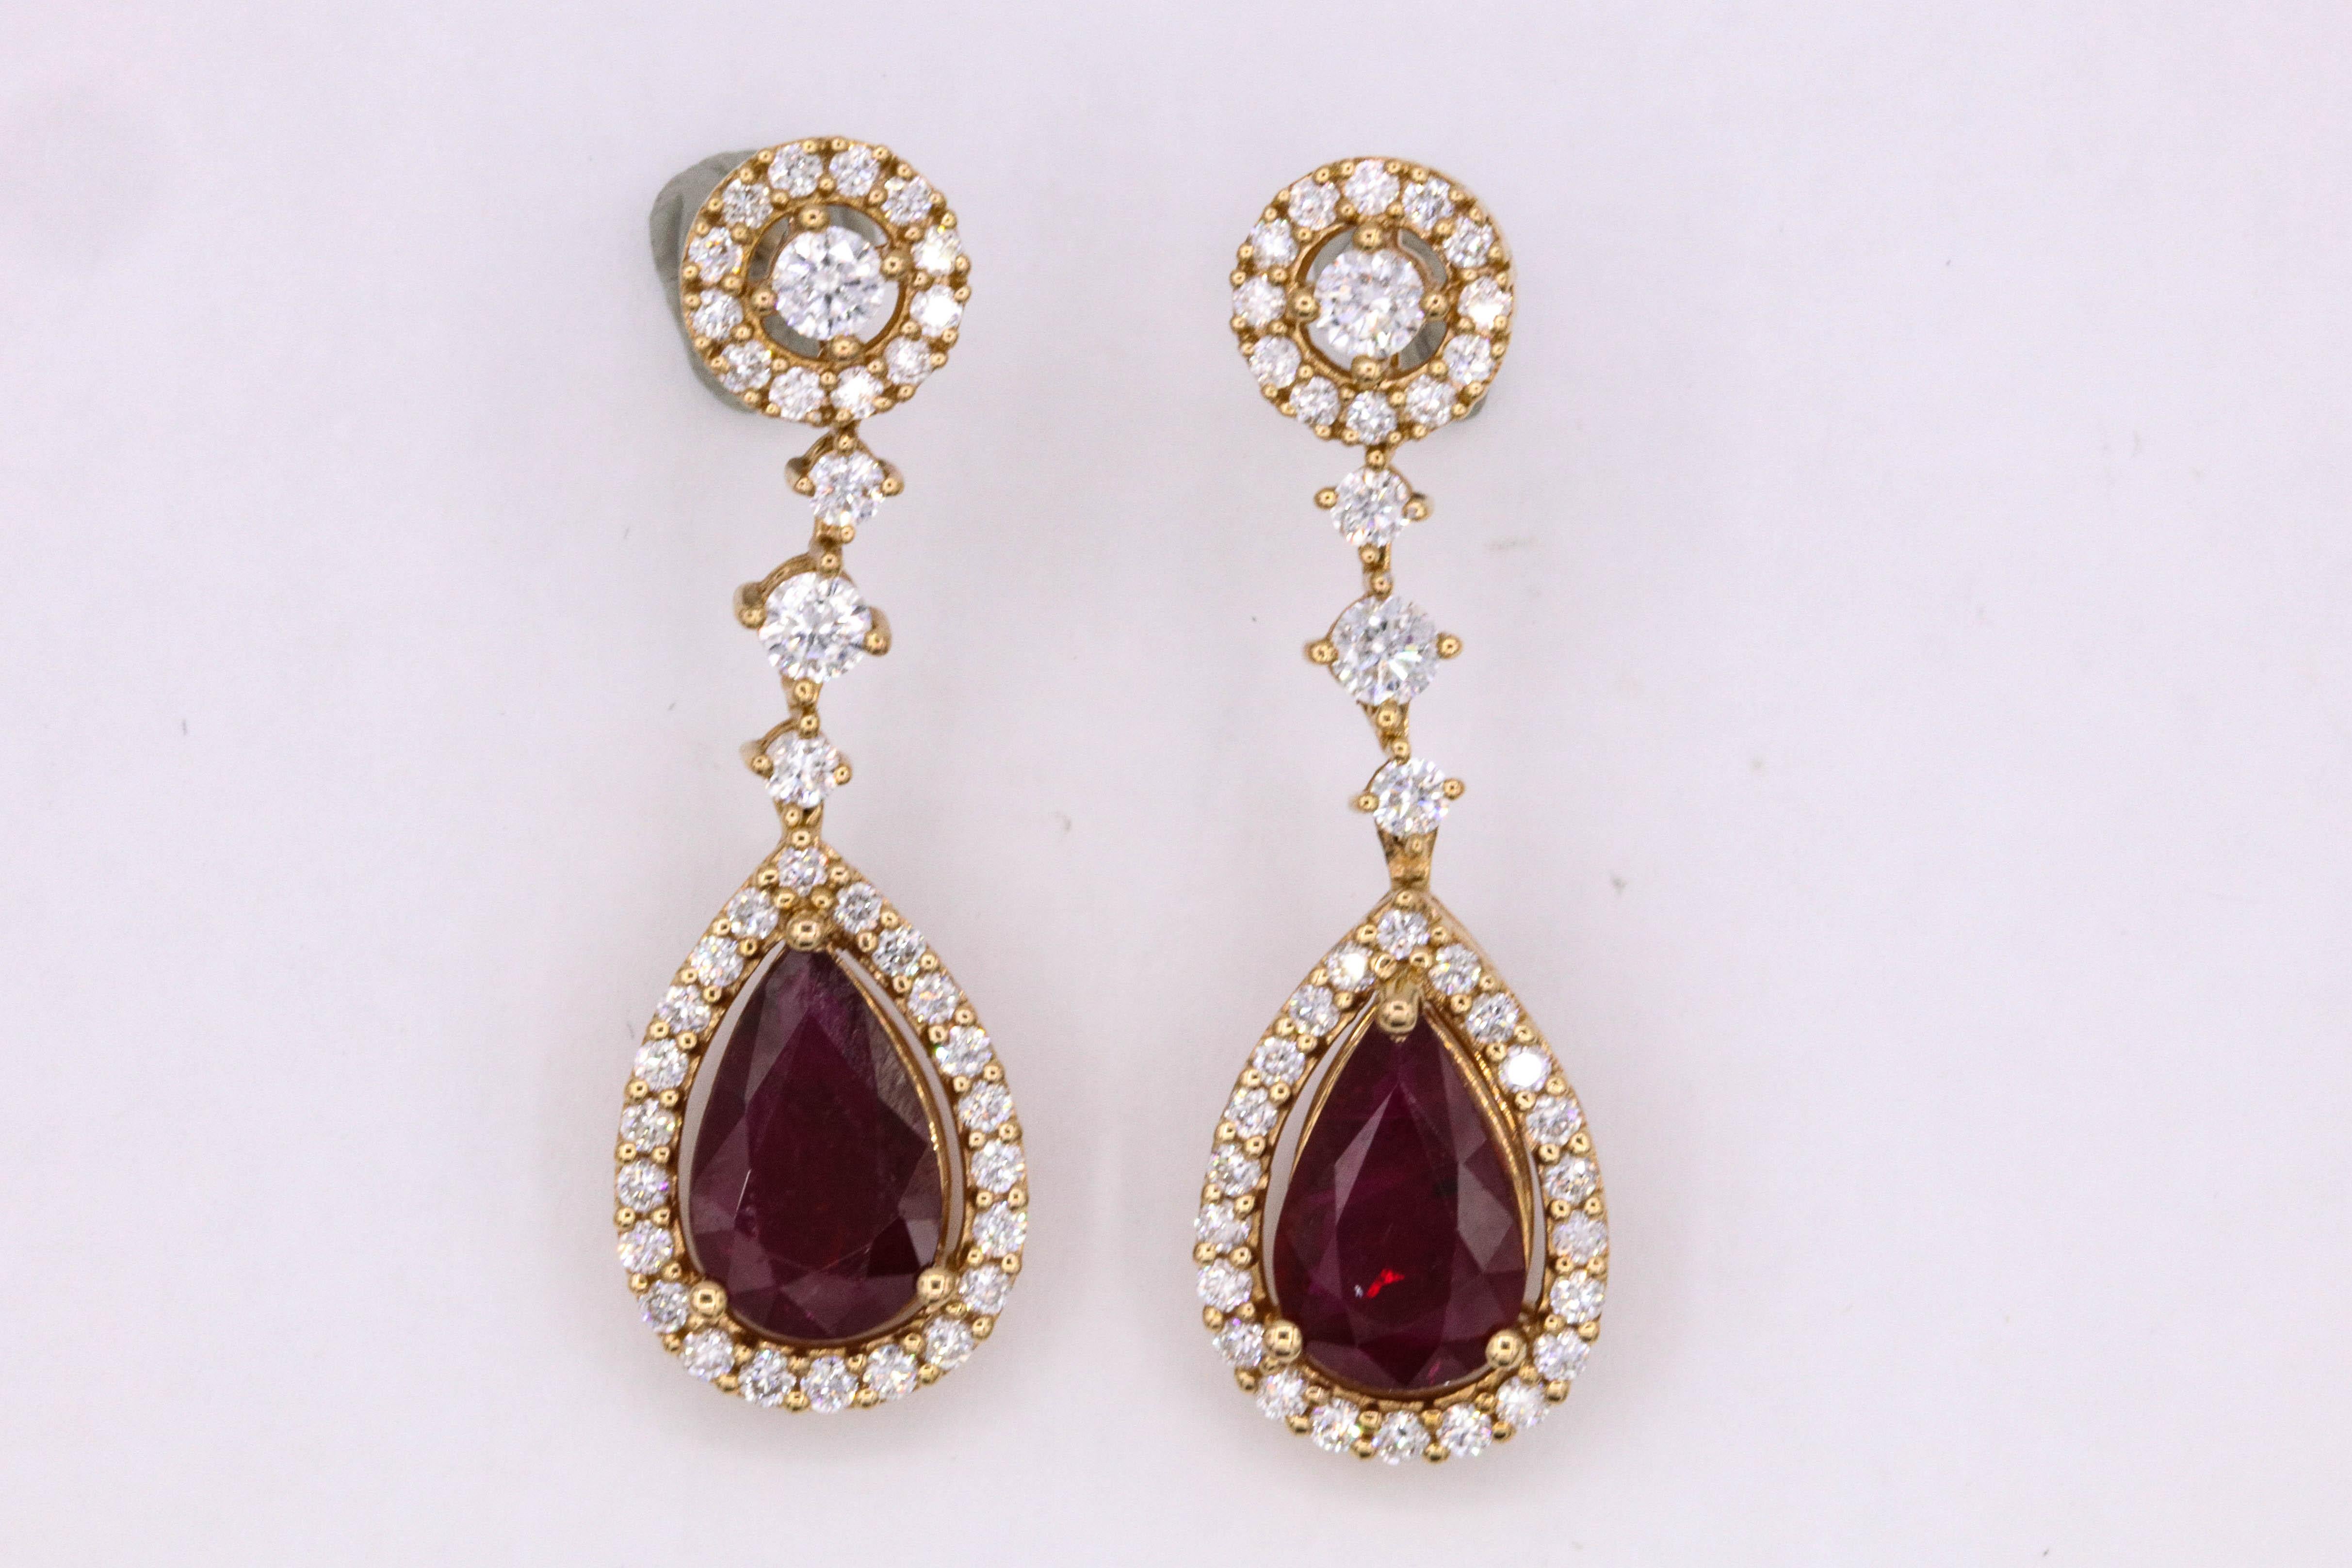 18k Rose gold drop earrings featuring two pear shape red rubies, 3.38 carats surrounded by round brilliants weighing 1.31 carats.
Color G-H
Clarity SI